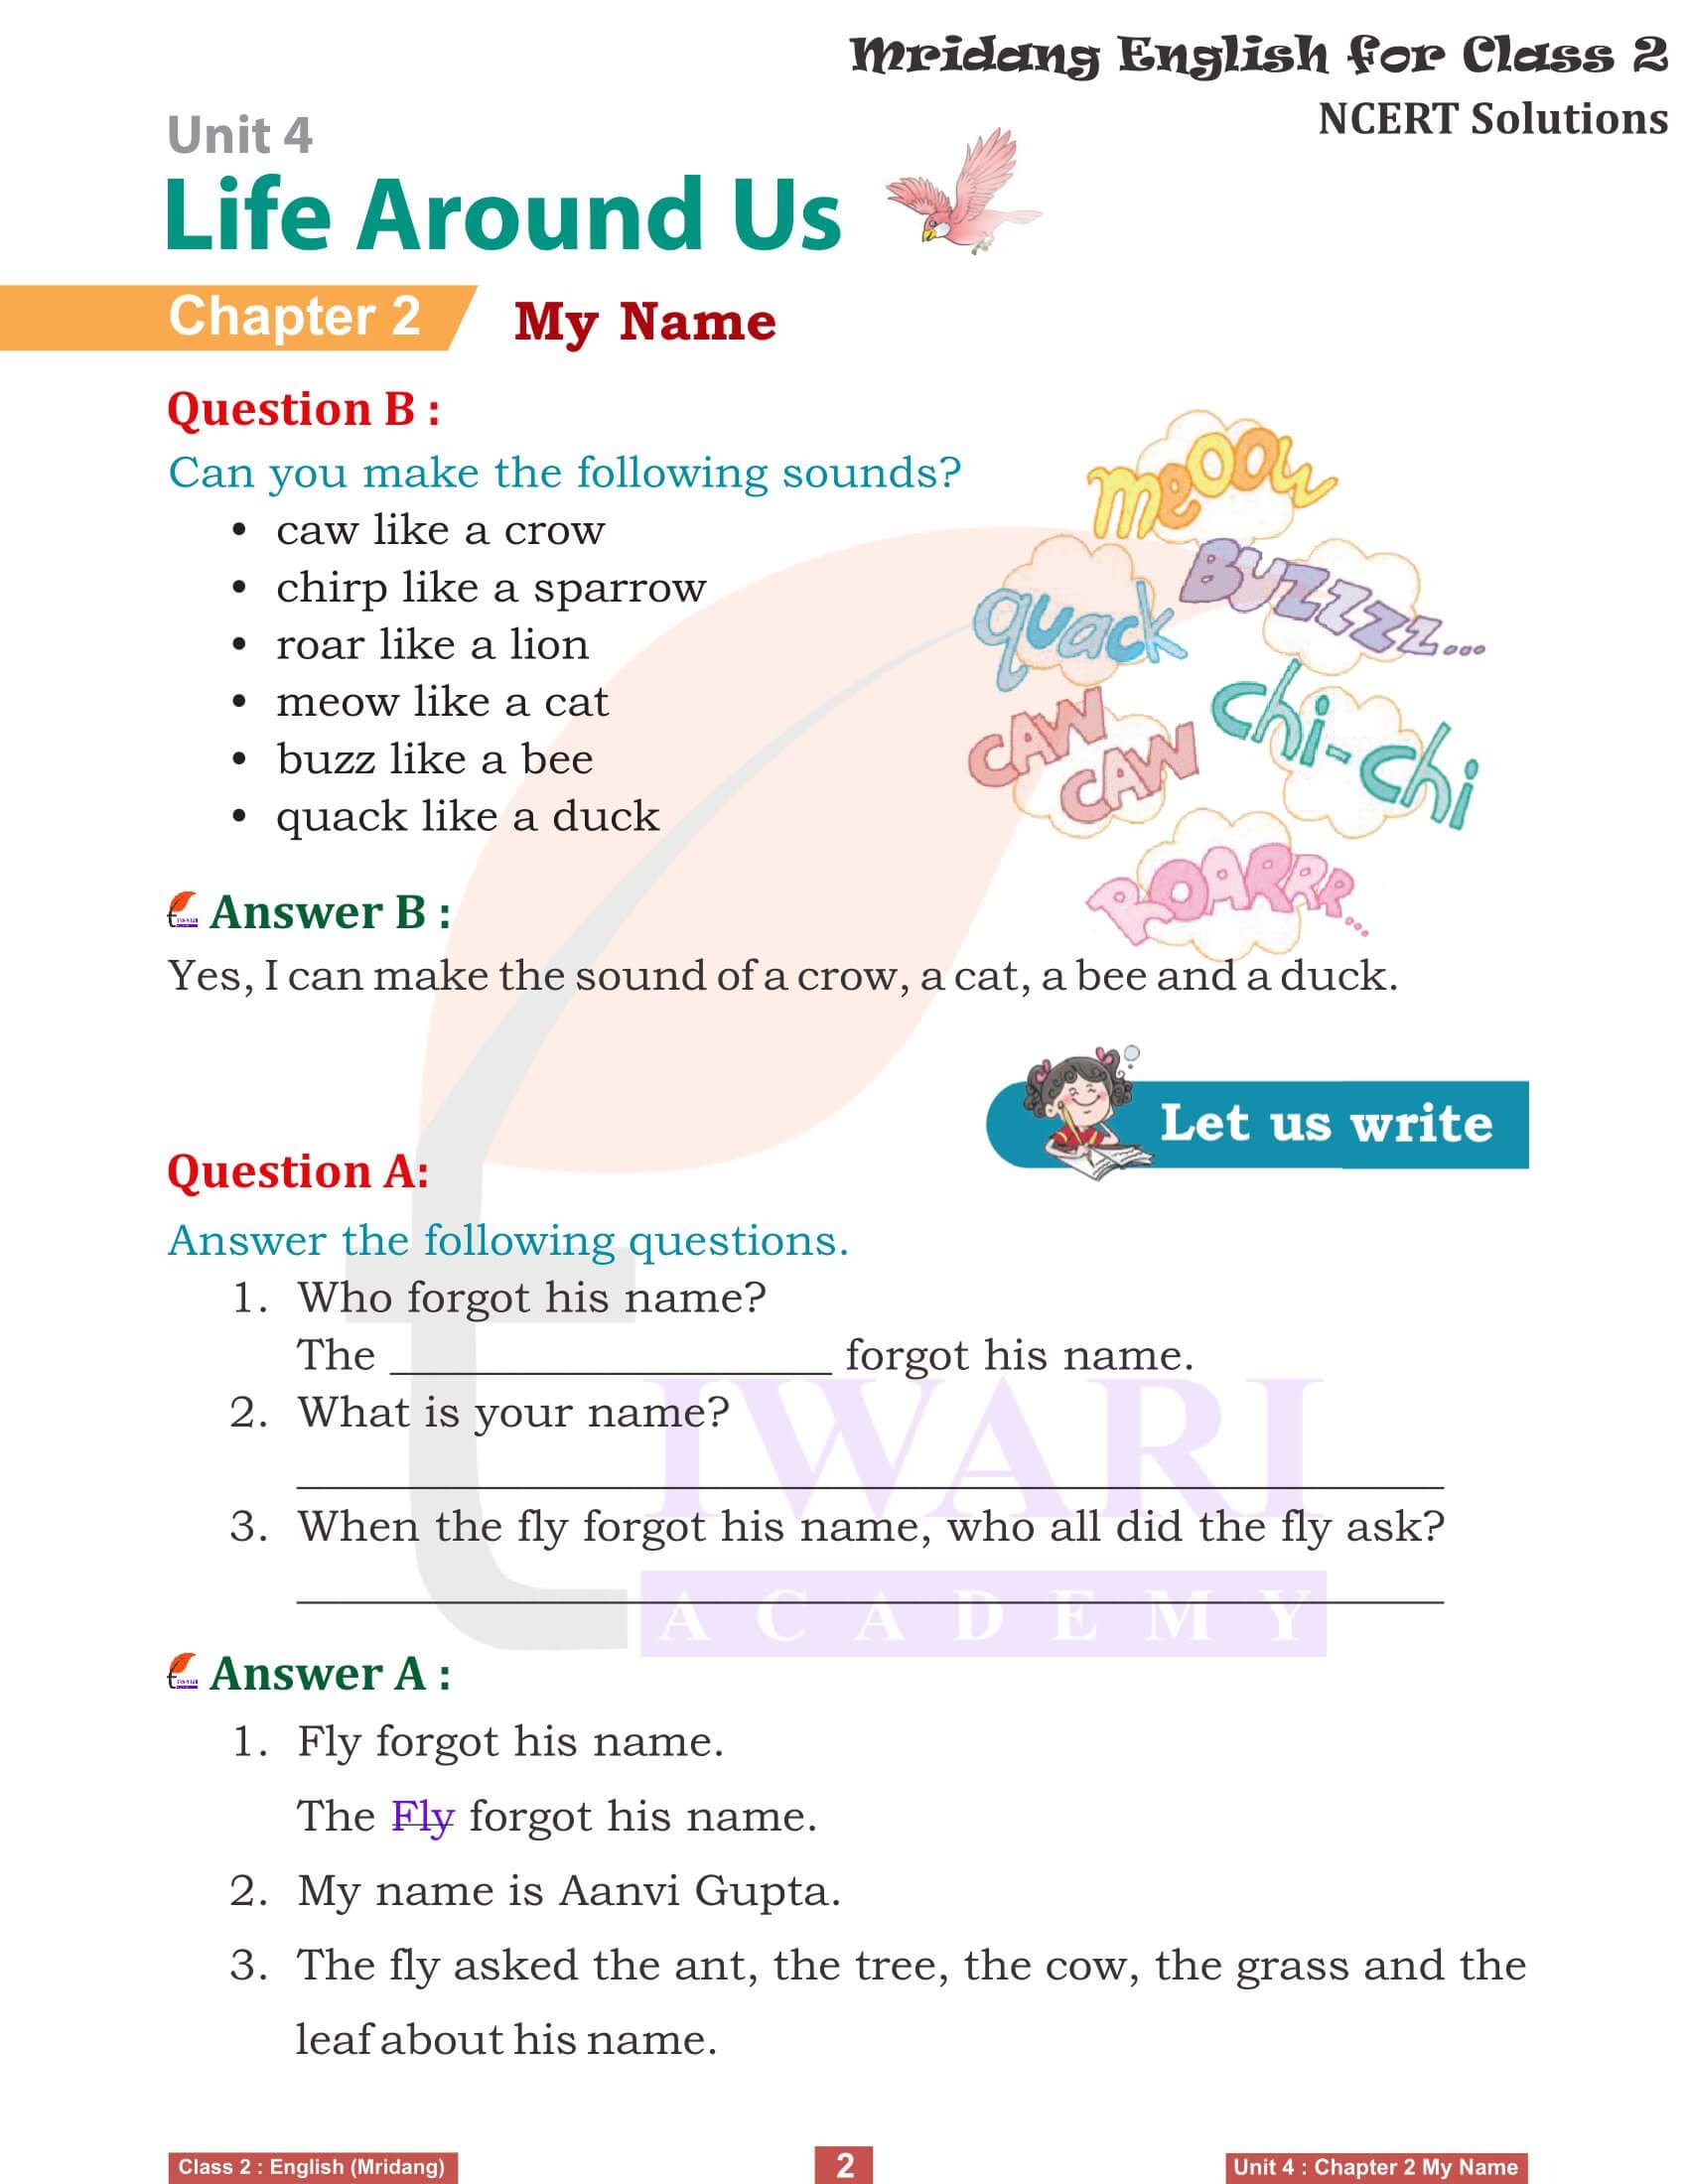 NCERT Solutions for Class 2 English Mridang Unit 4 Life Around Us Chapter 2 My Name Answers